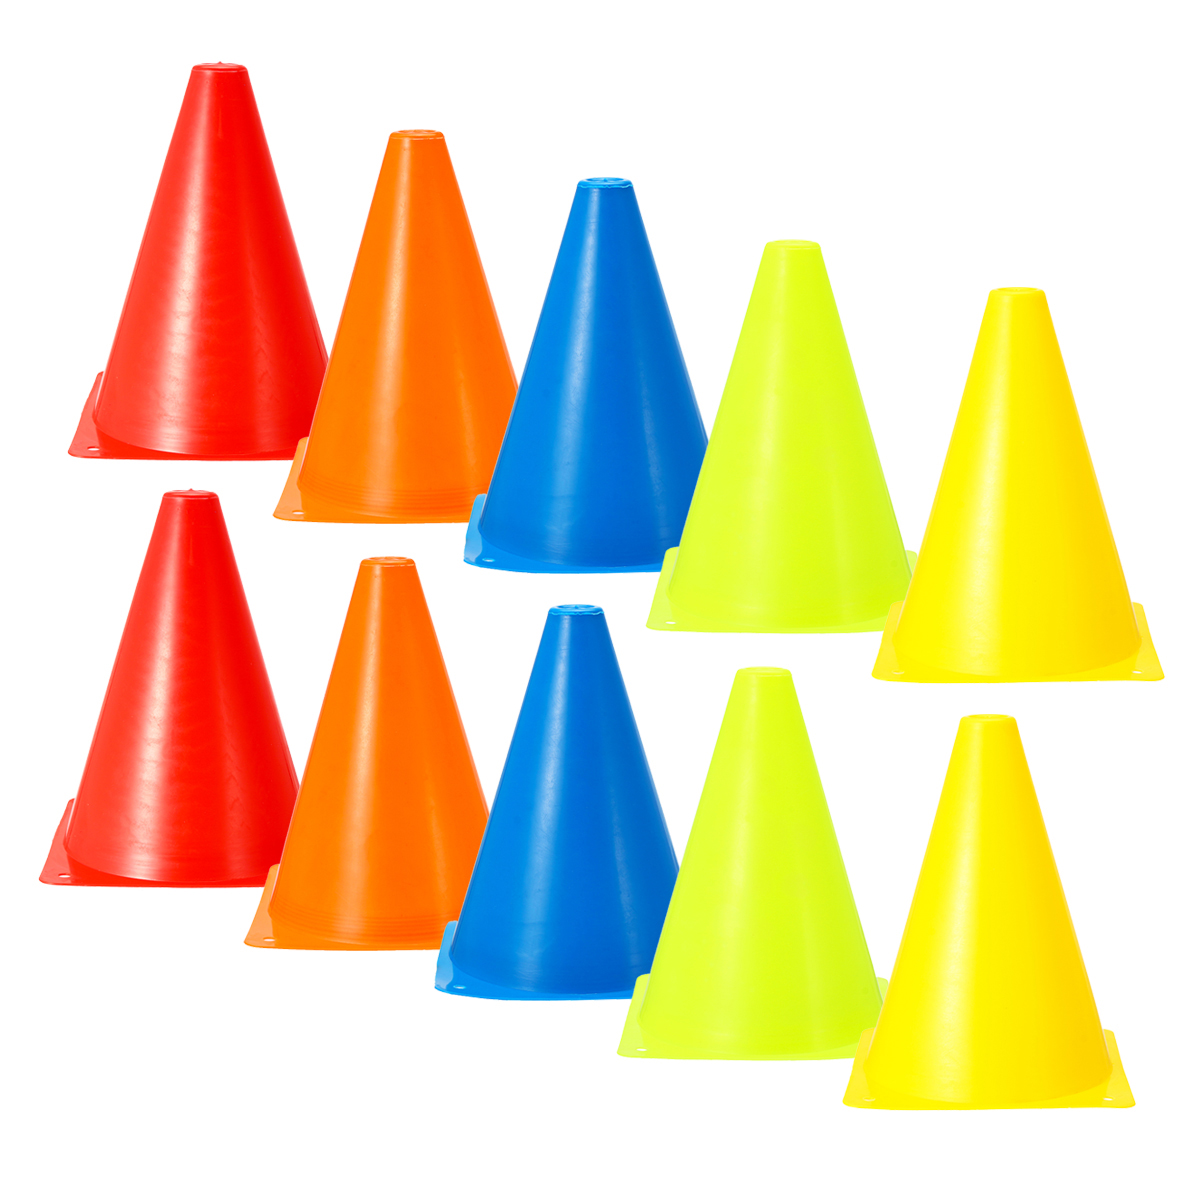 10PcsSet-Plastic-Training-Cone-Sport-Marking-Cups-Soccer-Basketball-Skate-Marker-Outdoor-Activity-Su-1486061